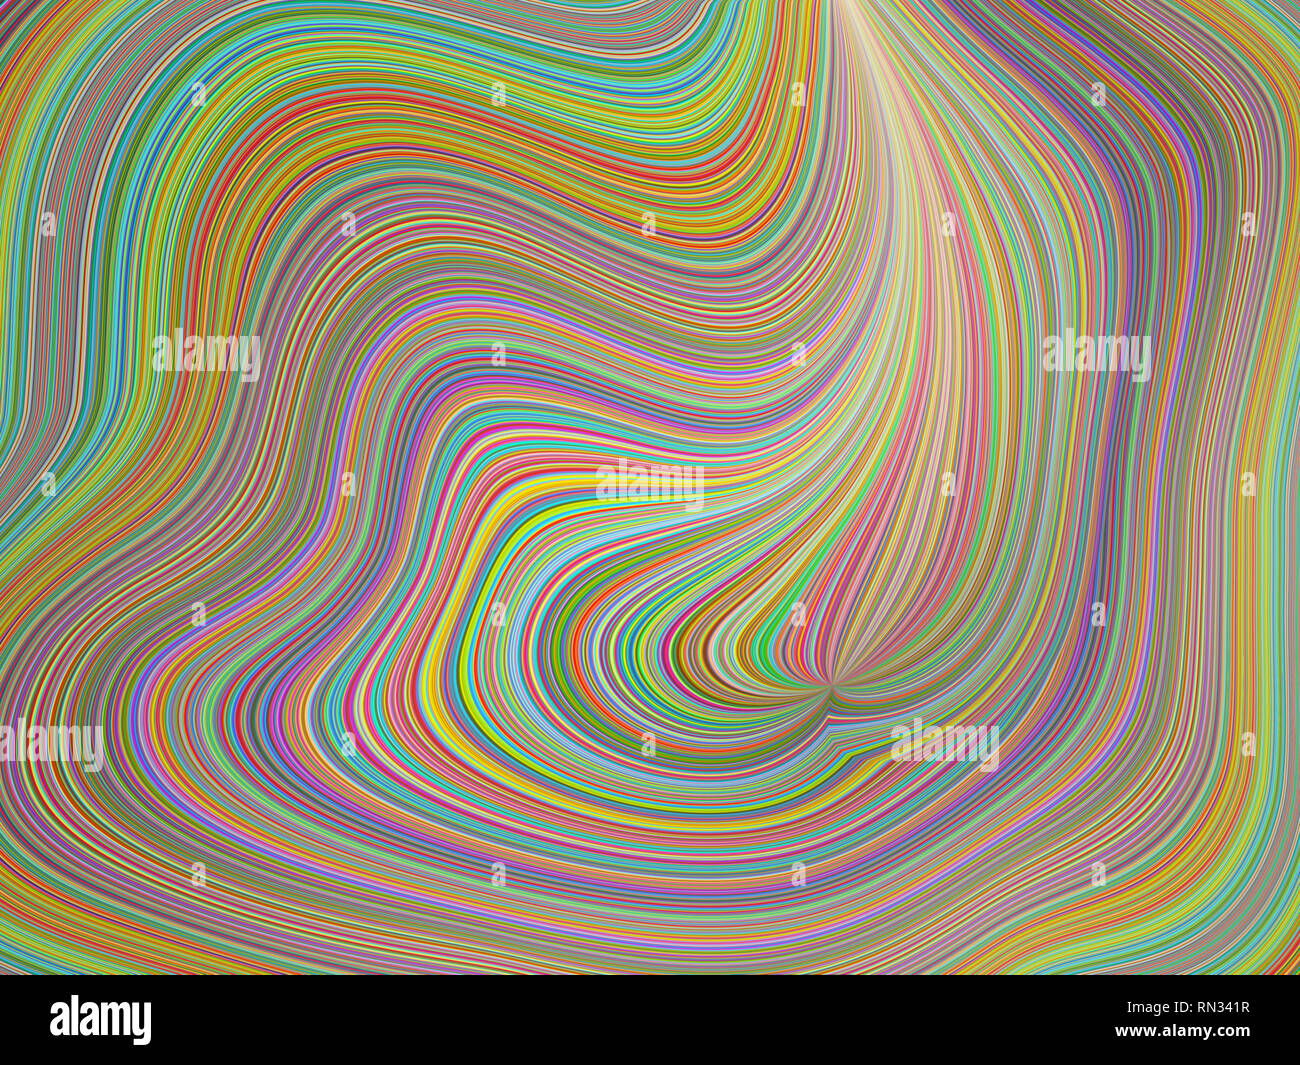 3D rendering illustration, colorful abstract background image. Stock Photo